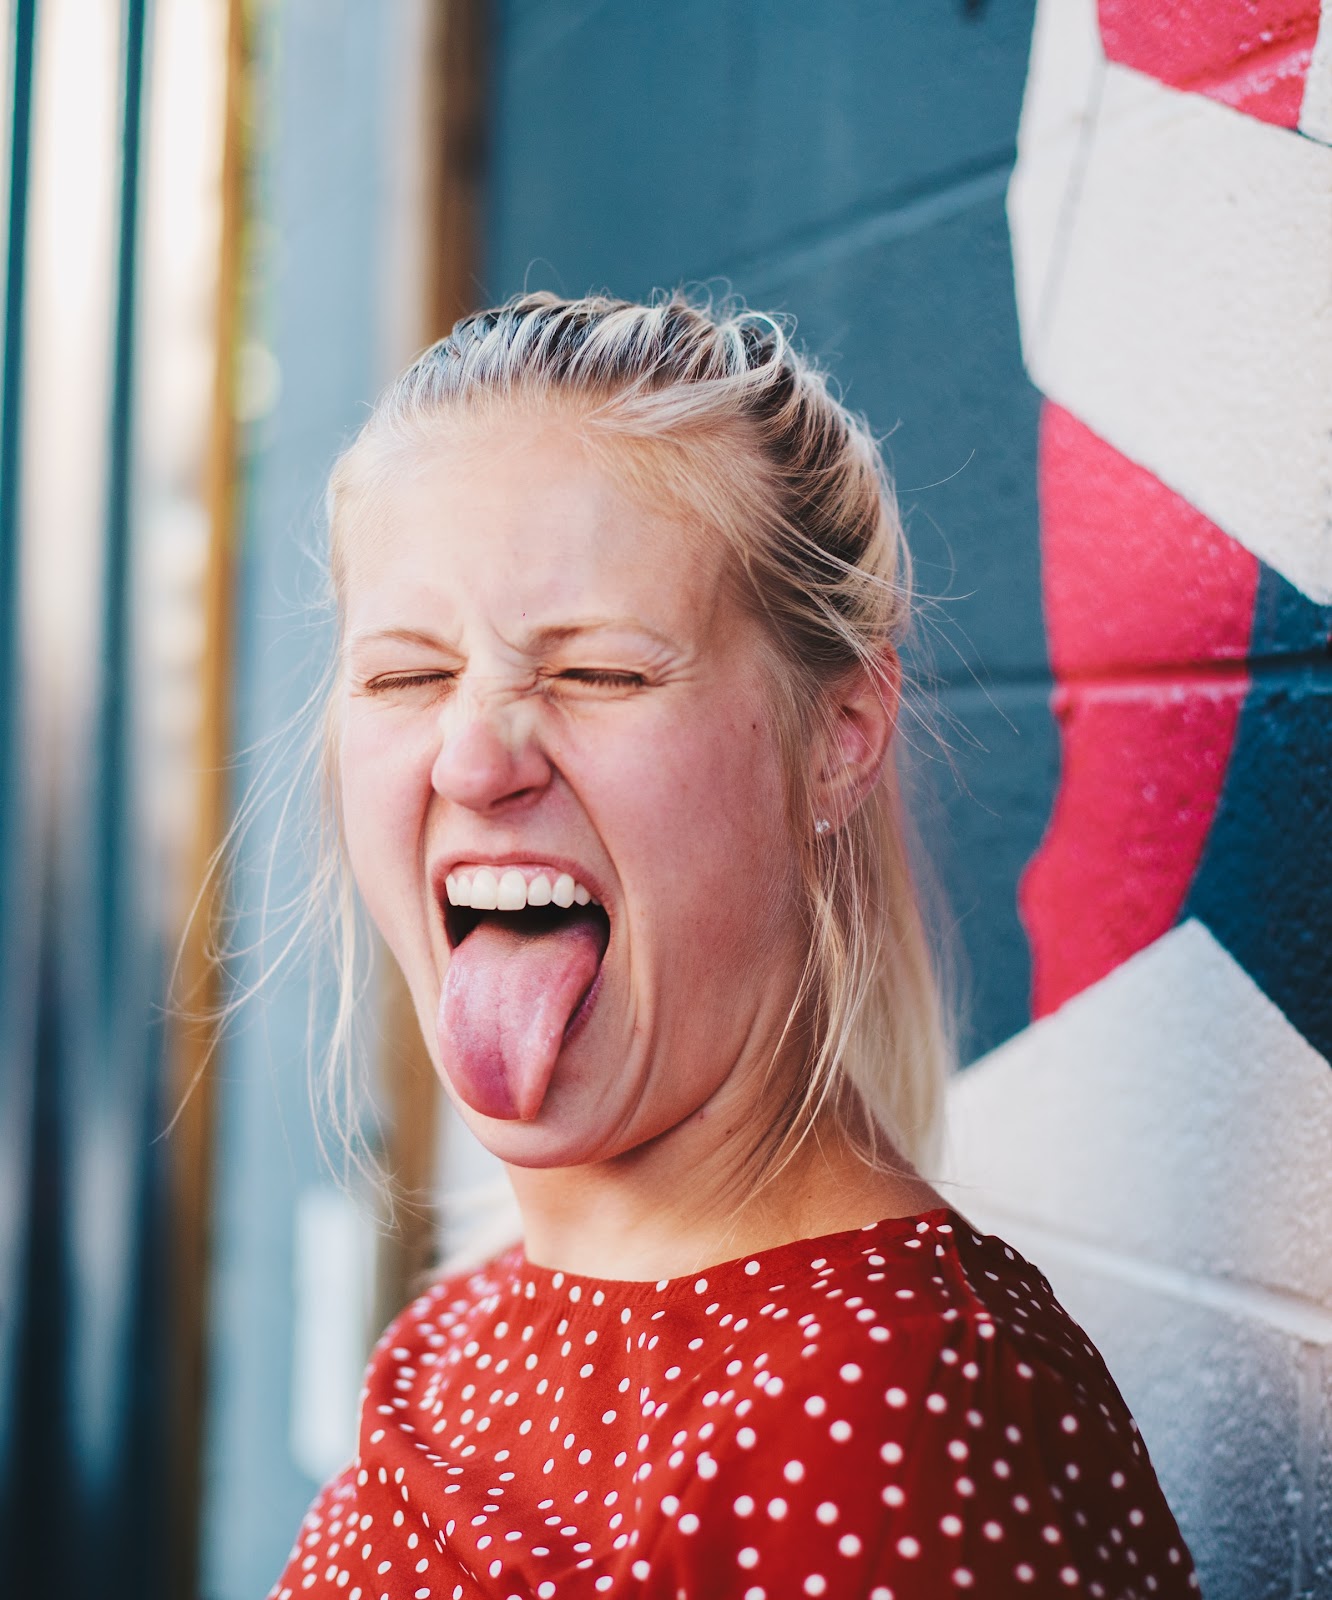 A young lady with her mouth open wide and her tongue sticking out.